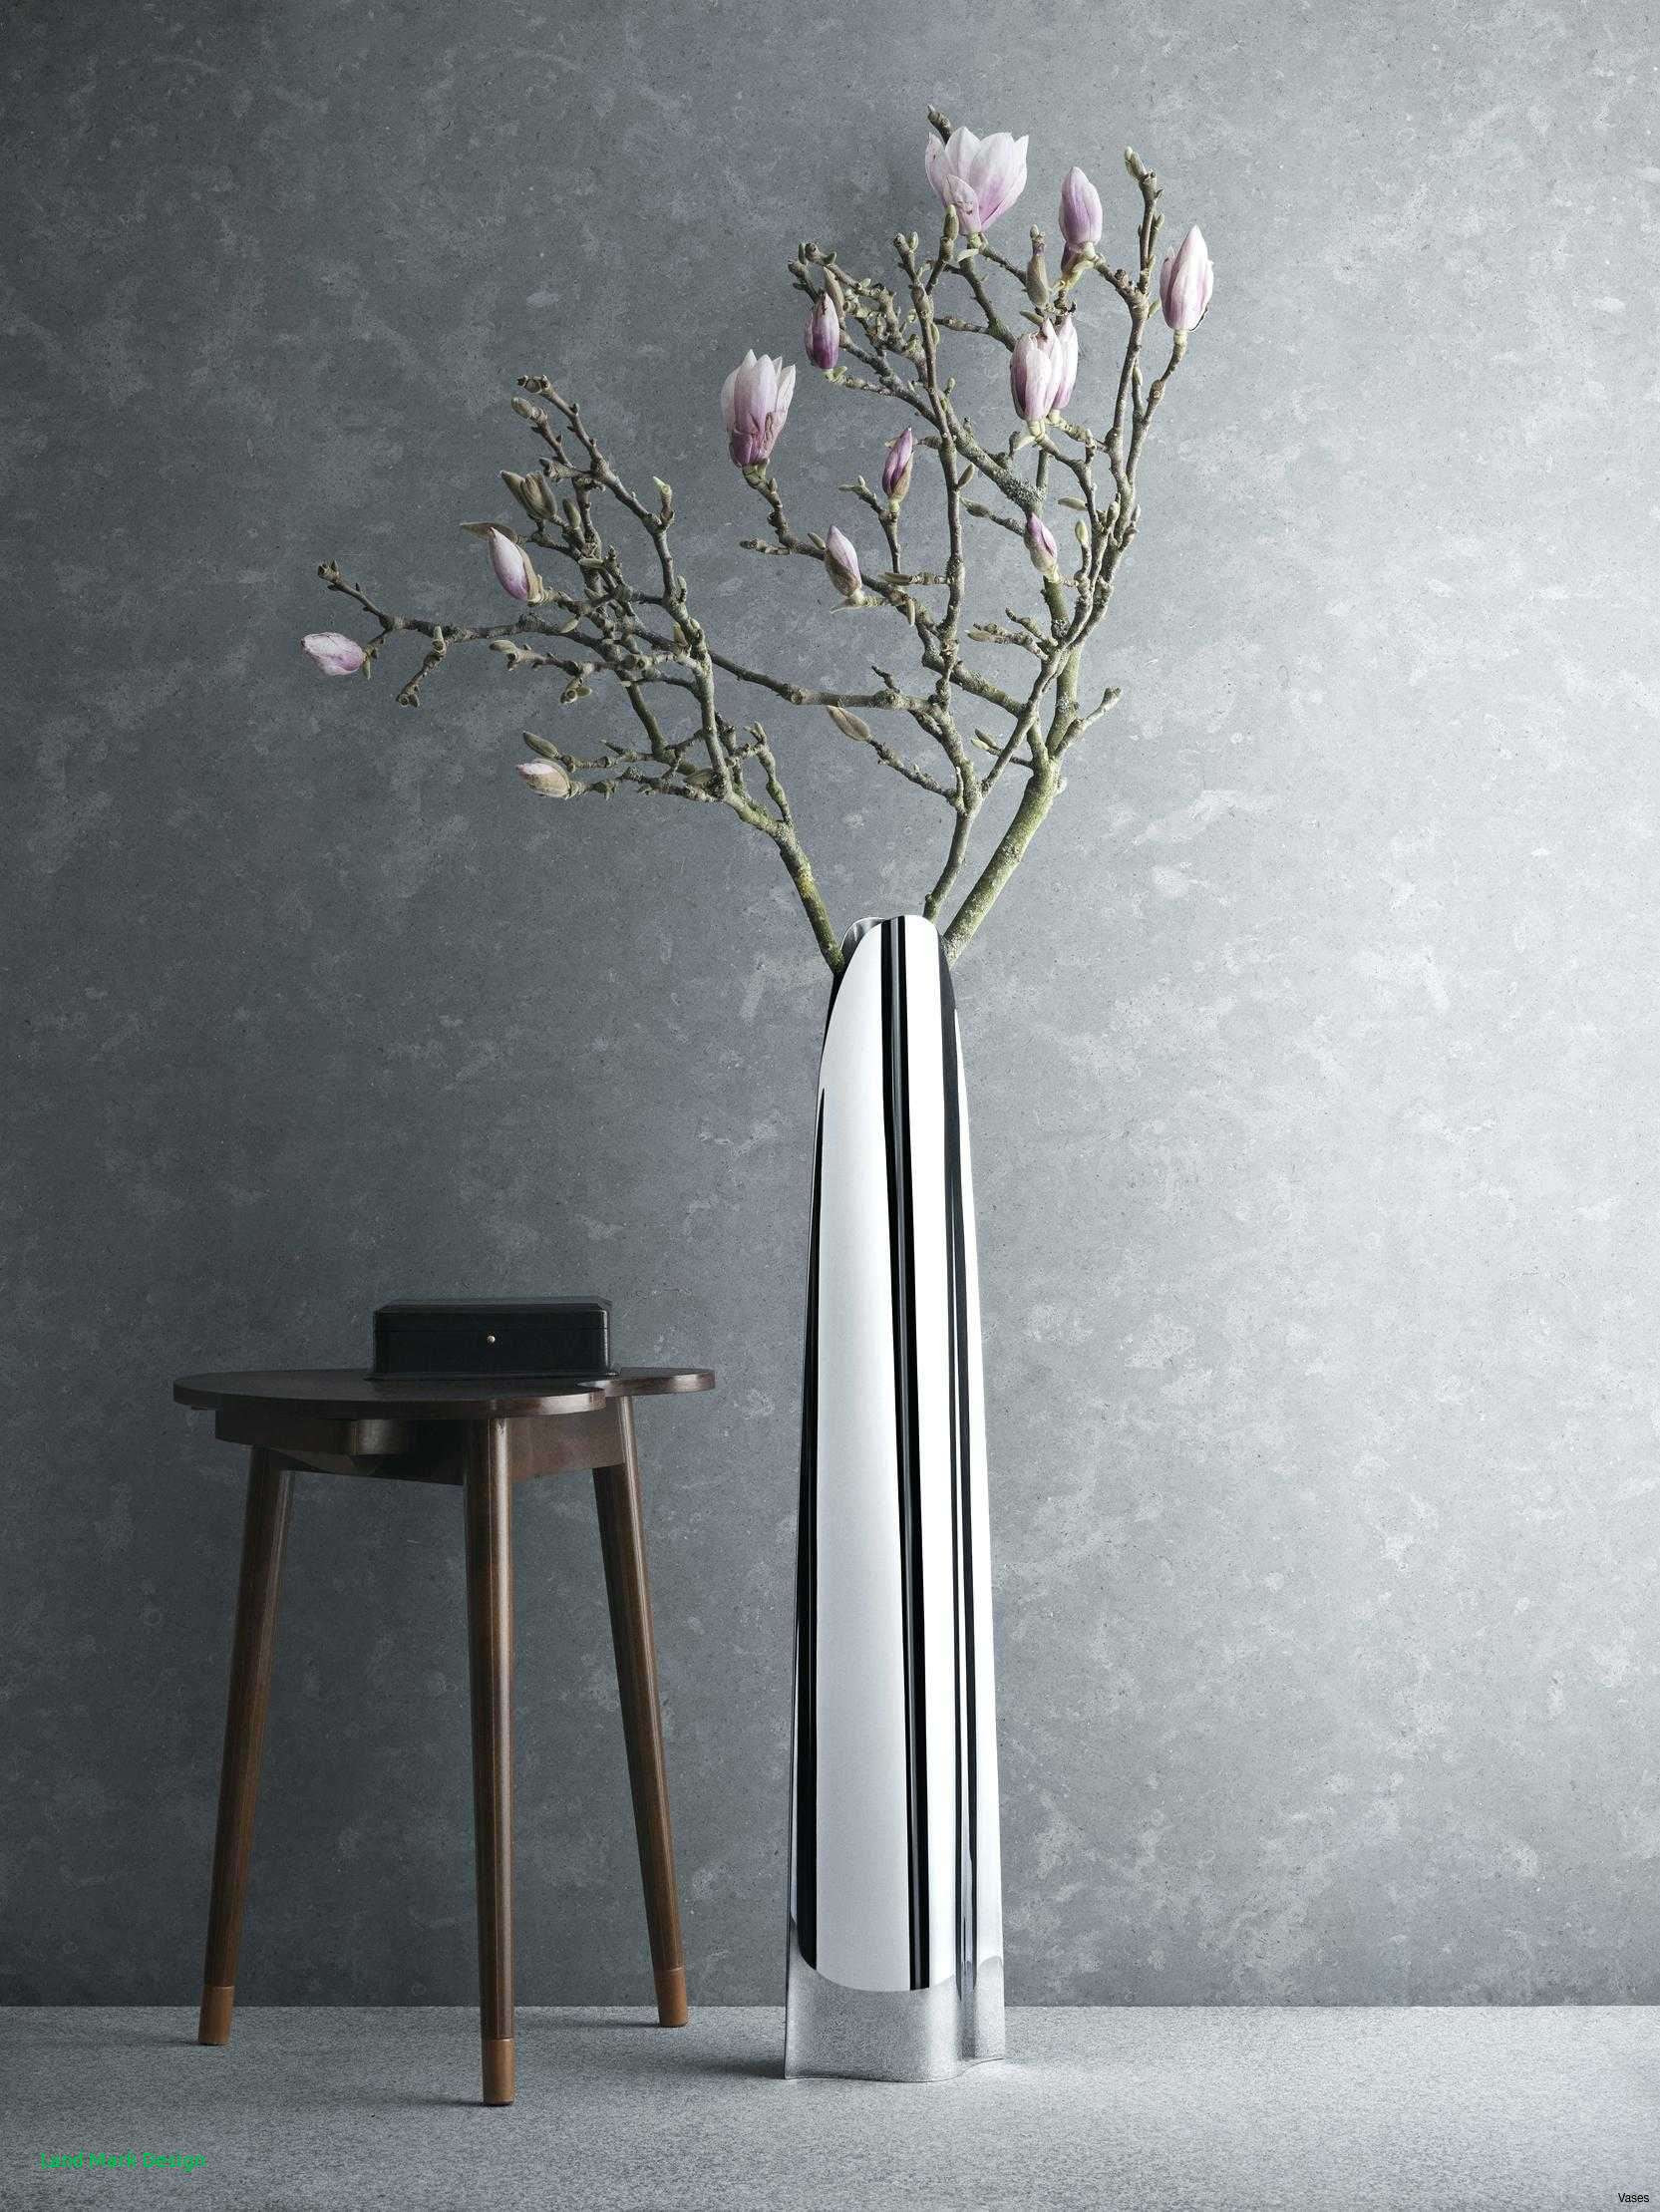 13 Fashionable Extra Large Clear Vase 2024 free download extra large clear vase of 17 unique extra large vase bogekompresorturkiye com for floor decor vase tall ideash vases contemporary fill a substantial with arrangement of led branches it